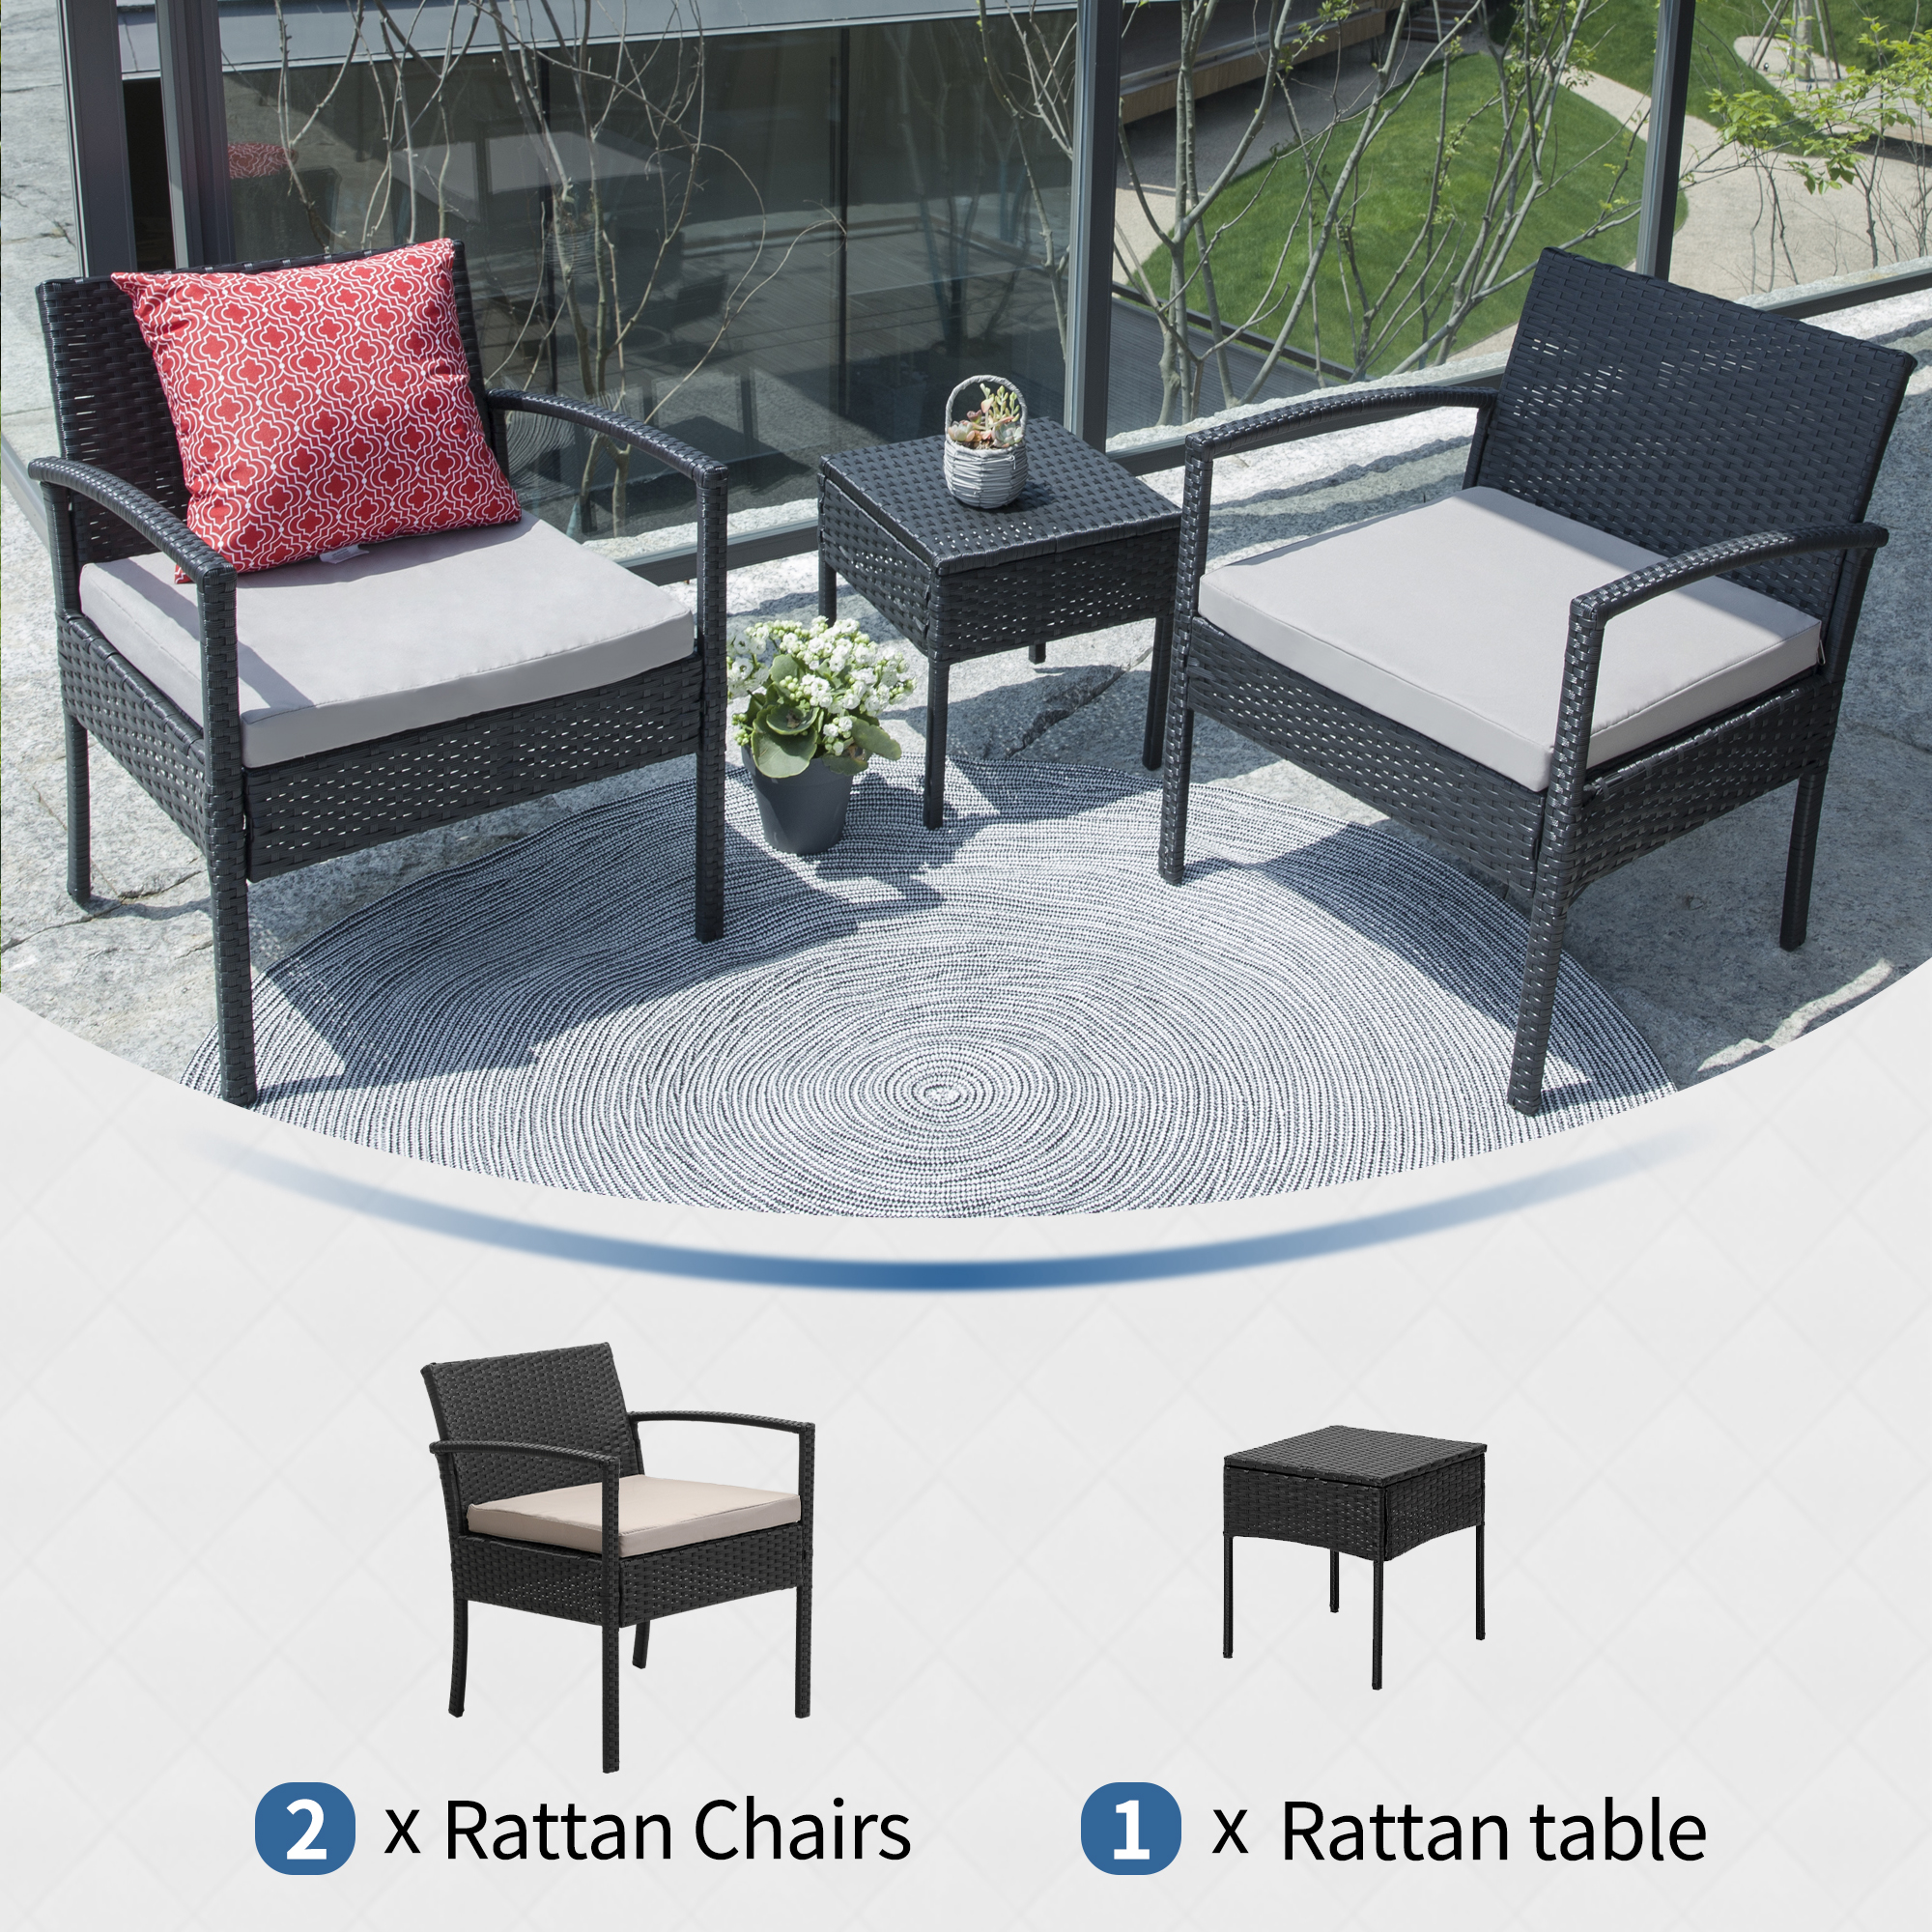 FHFO Patio Furniture Set Outdoor Furniture Outdoor Patio Furniture Set 3 Pieces Patio Conversation Set Table and Chairs with Cushions for Garden Balcony Backyard Porch Lawn Black Rattan Grey Cushion - image 5 of 5